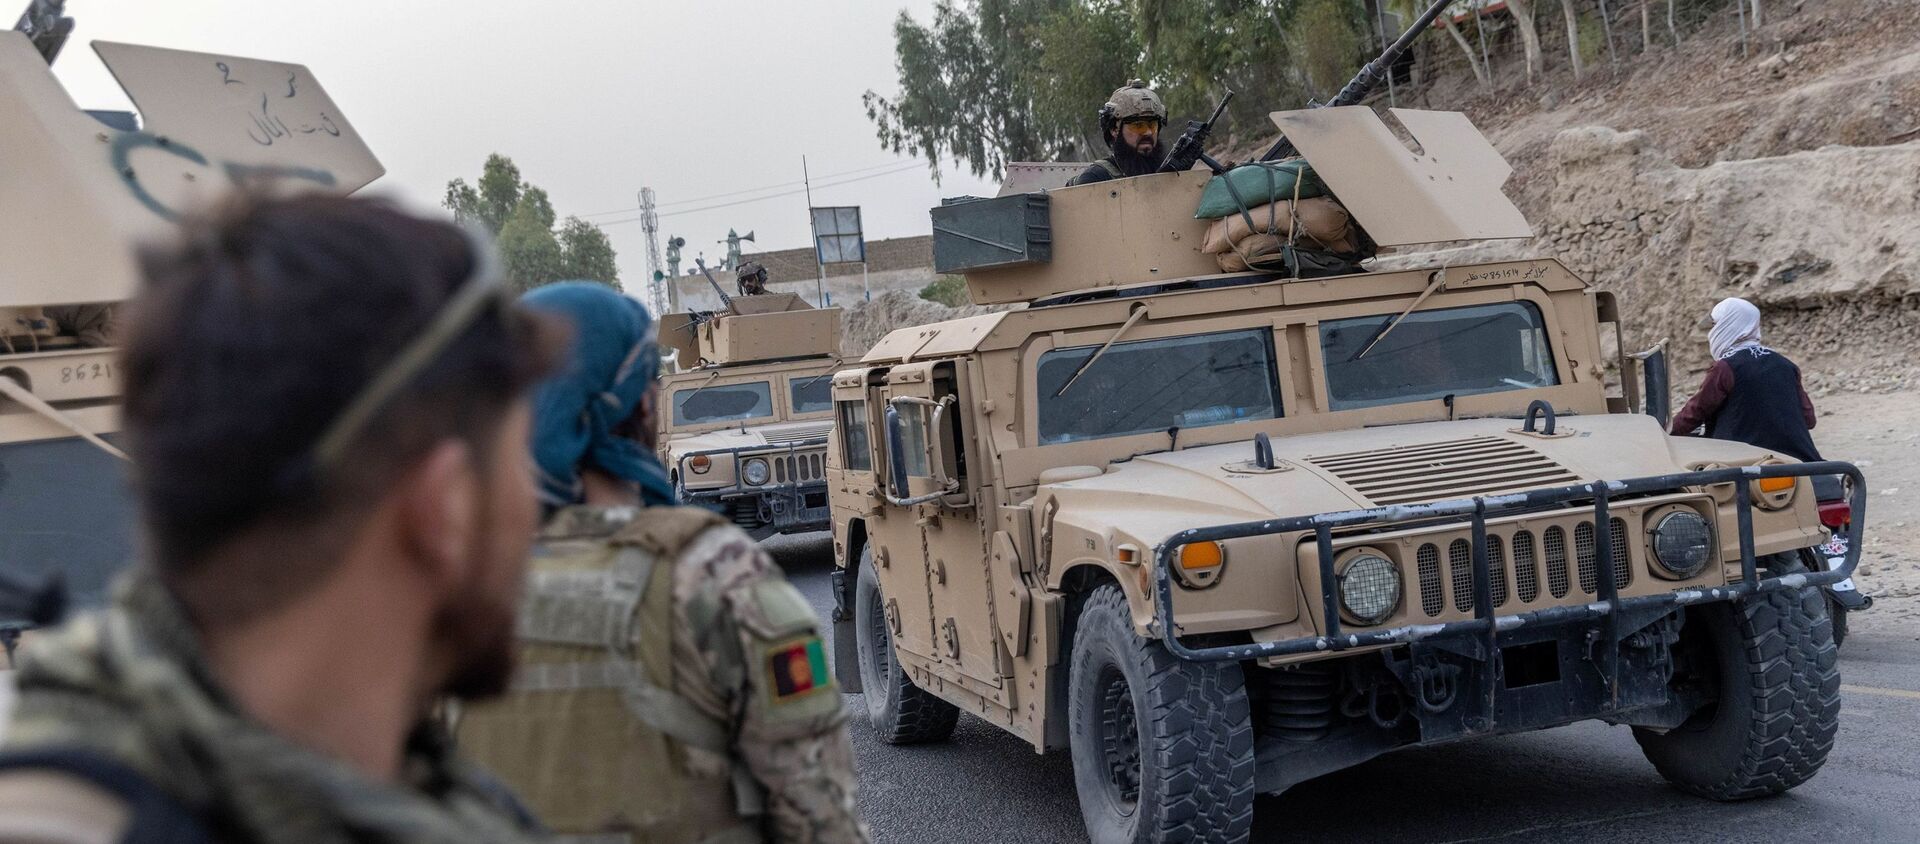 A convoy of Afghan Special Forces is seen during the rescue mission of a police officer besieged at a check post surrounded by Taliban, in Kandahar province, Afghanistan, July 13, 2021. REUTERS/Danish Siddiqui - Sputnik International, 1920